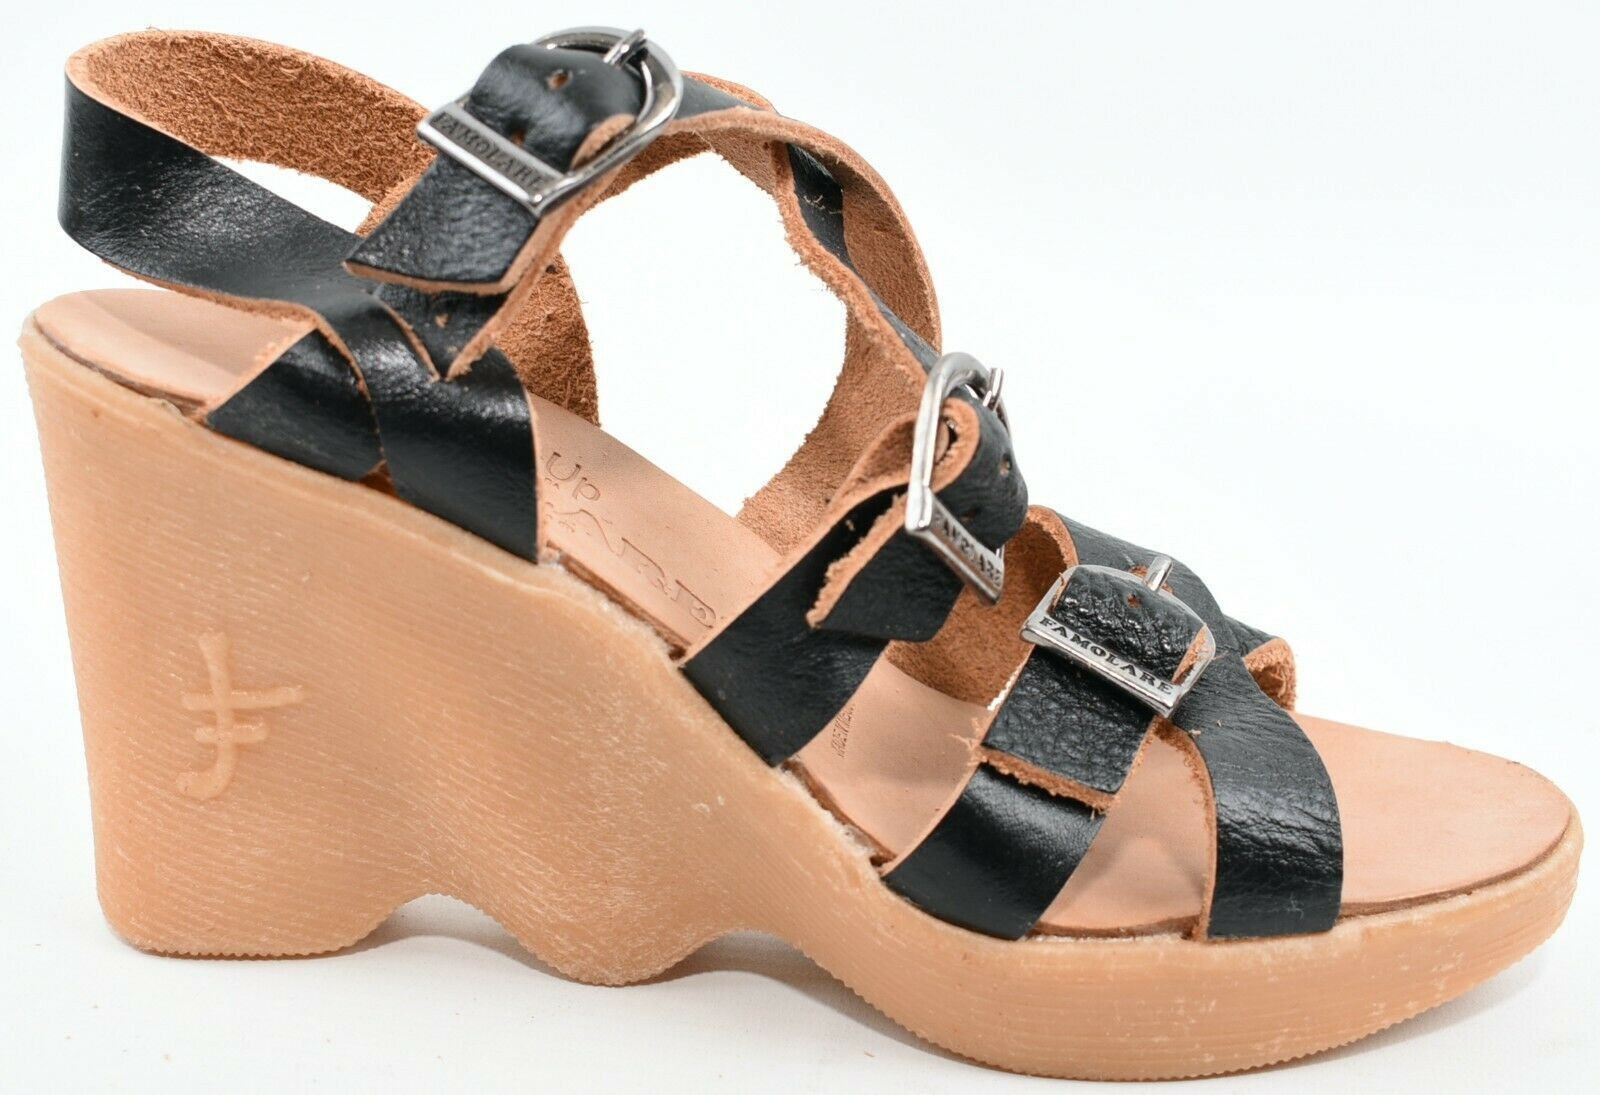 FAMOLARE Women's Black Strappy Leather Wedge Sandals, size UK 5.5